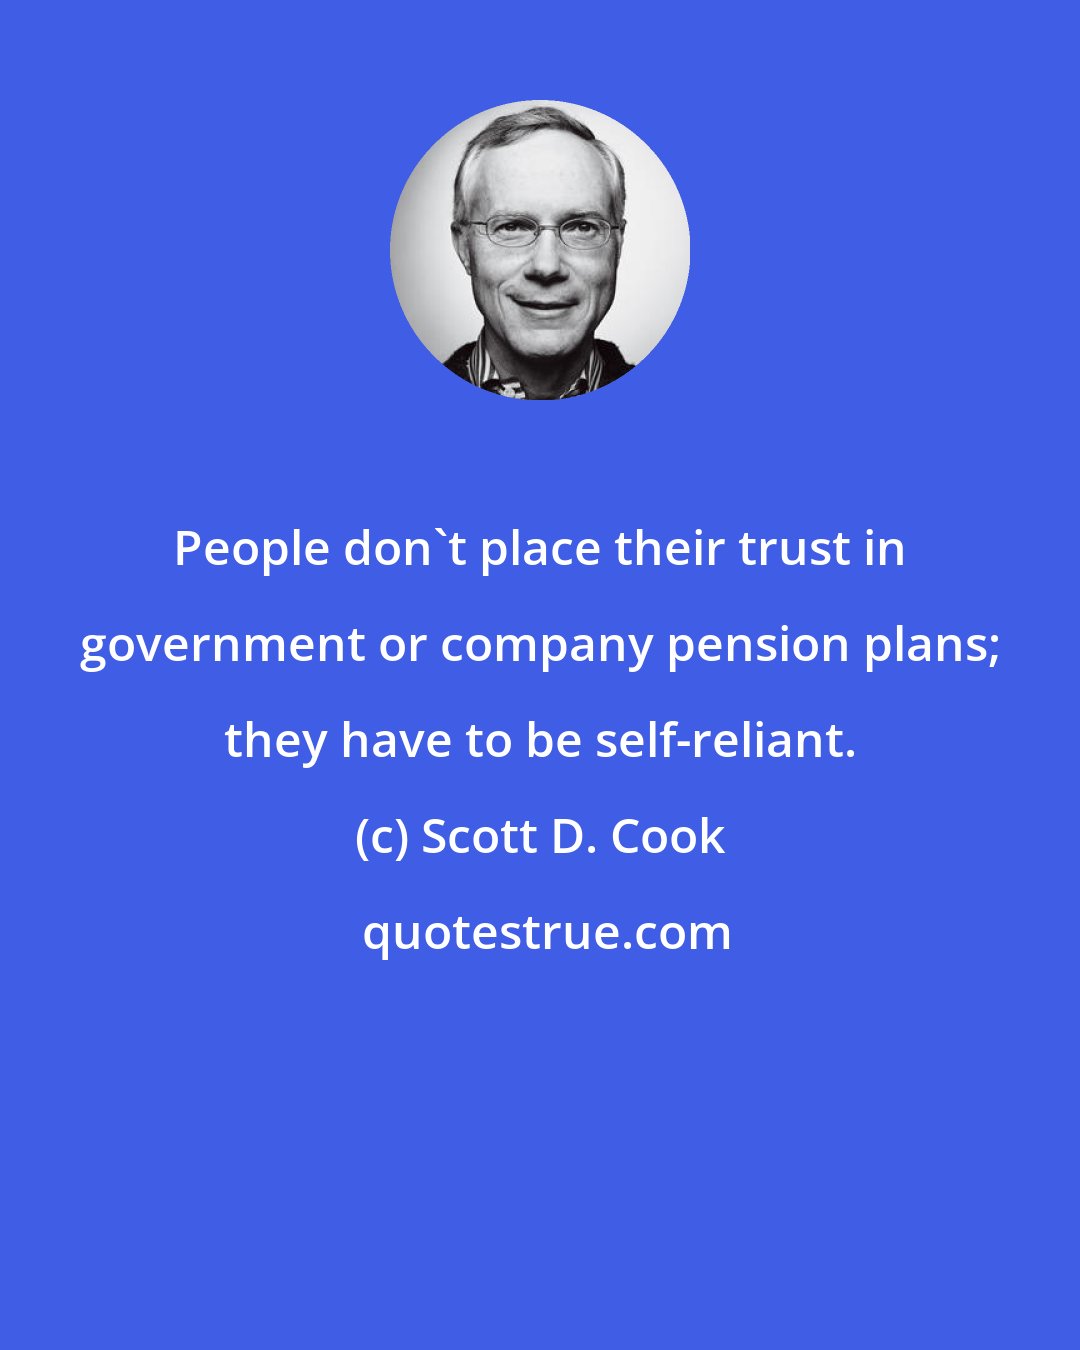 Scott D. Cook: People don't place their trust in government or company pension plans; they have to be self-reliant.